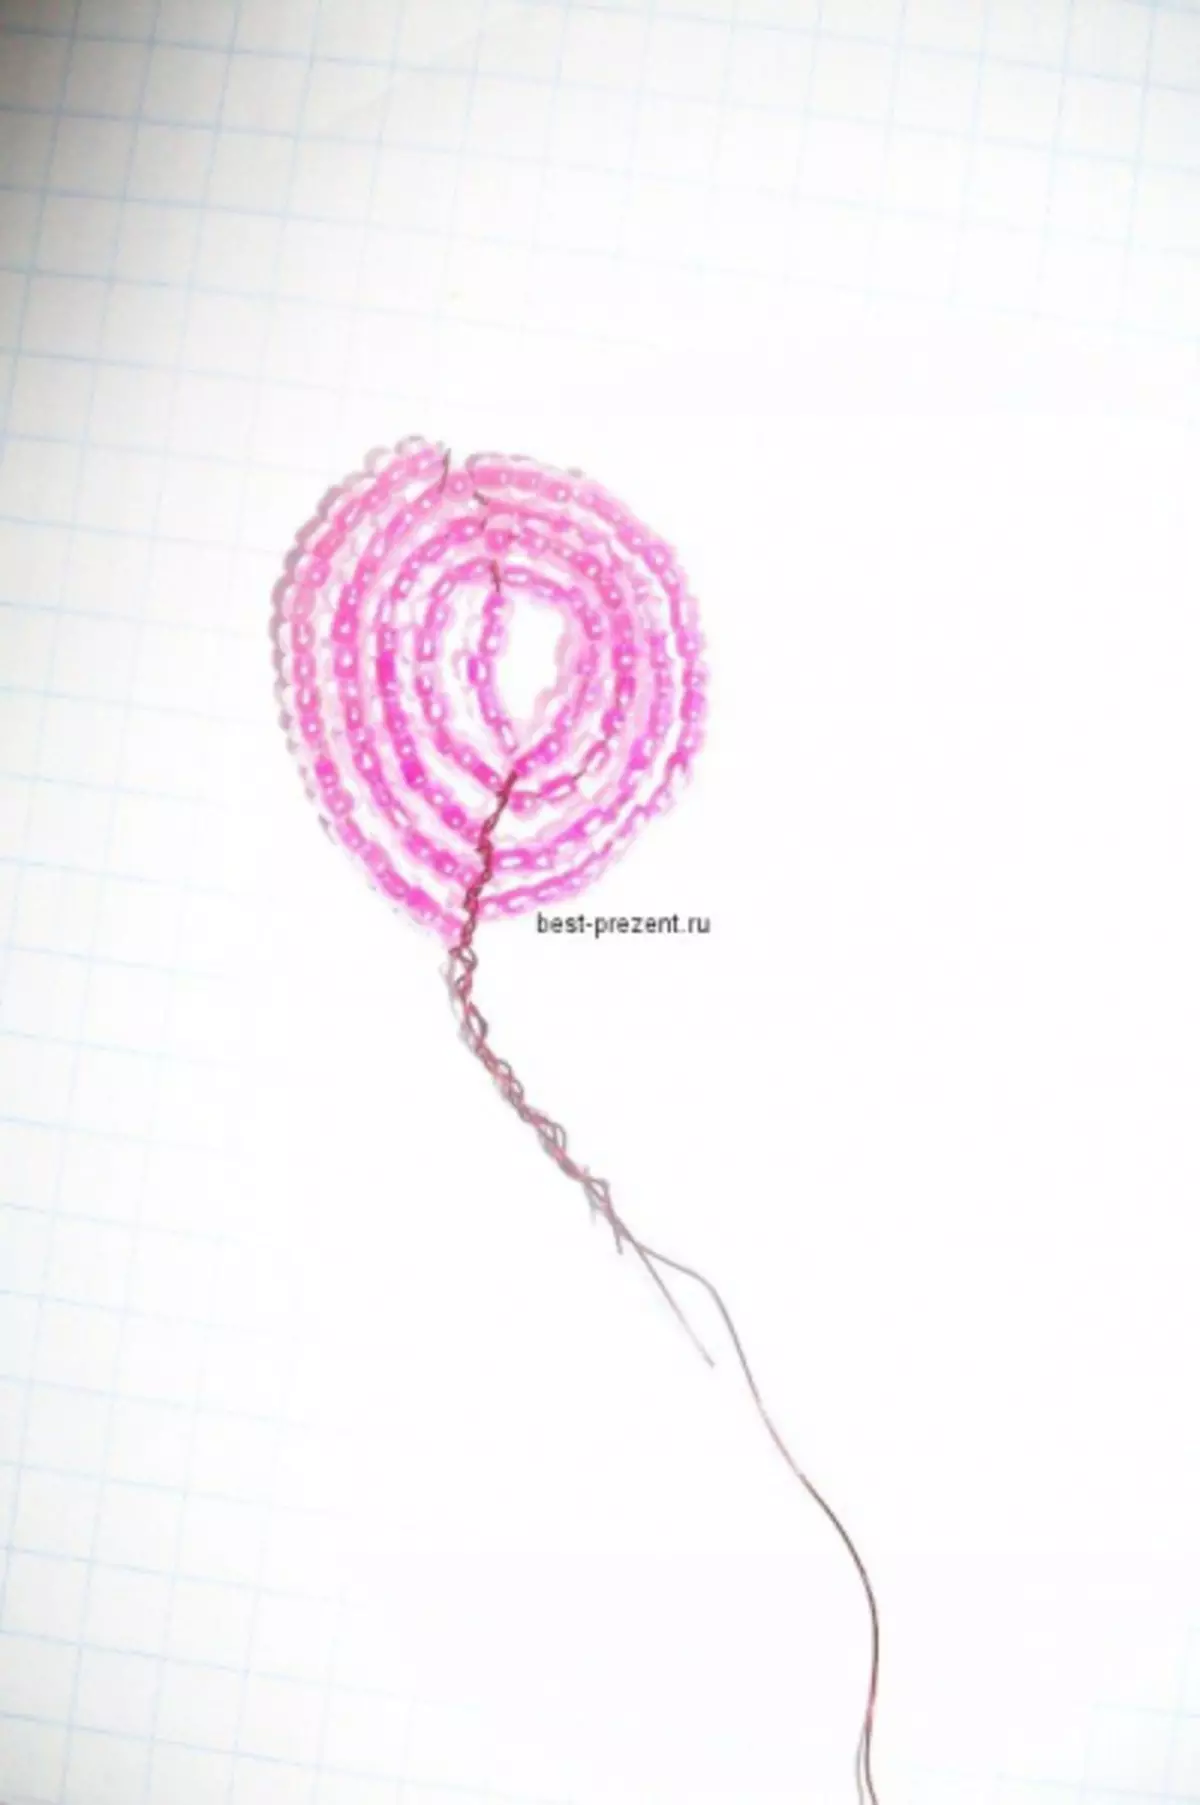 Beaded flowers for beginners: Weaving schemes simple roses with video tutorials